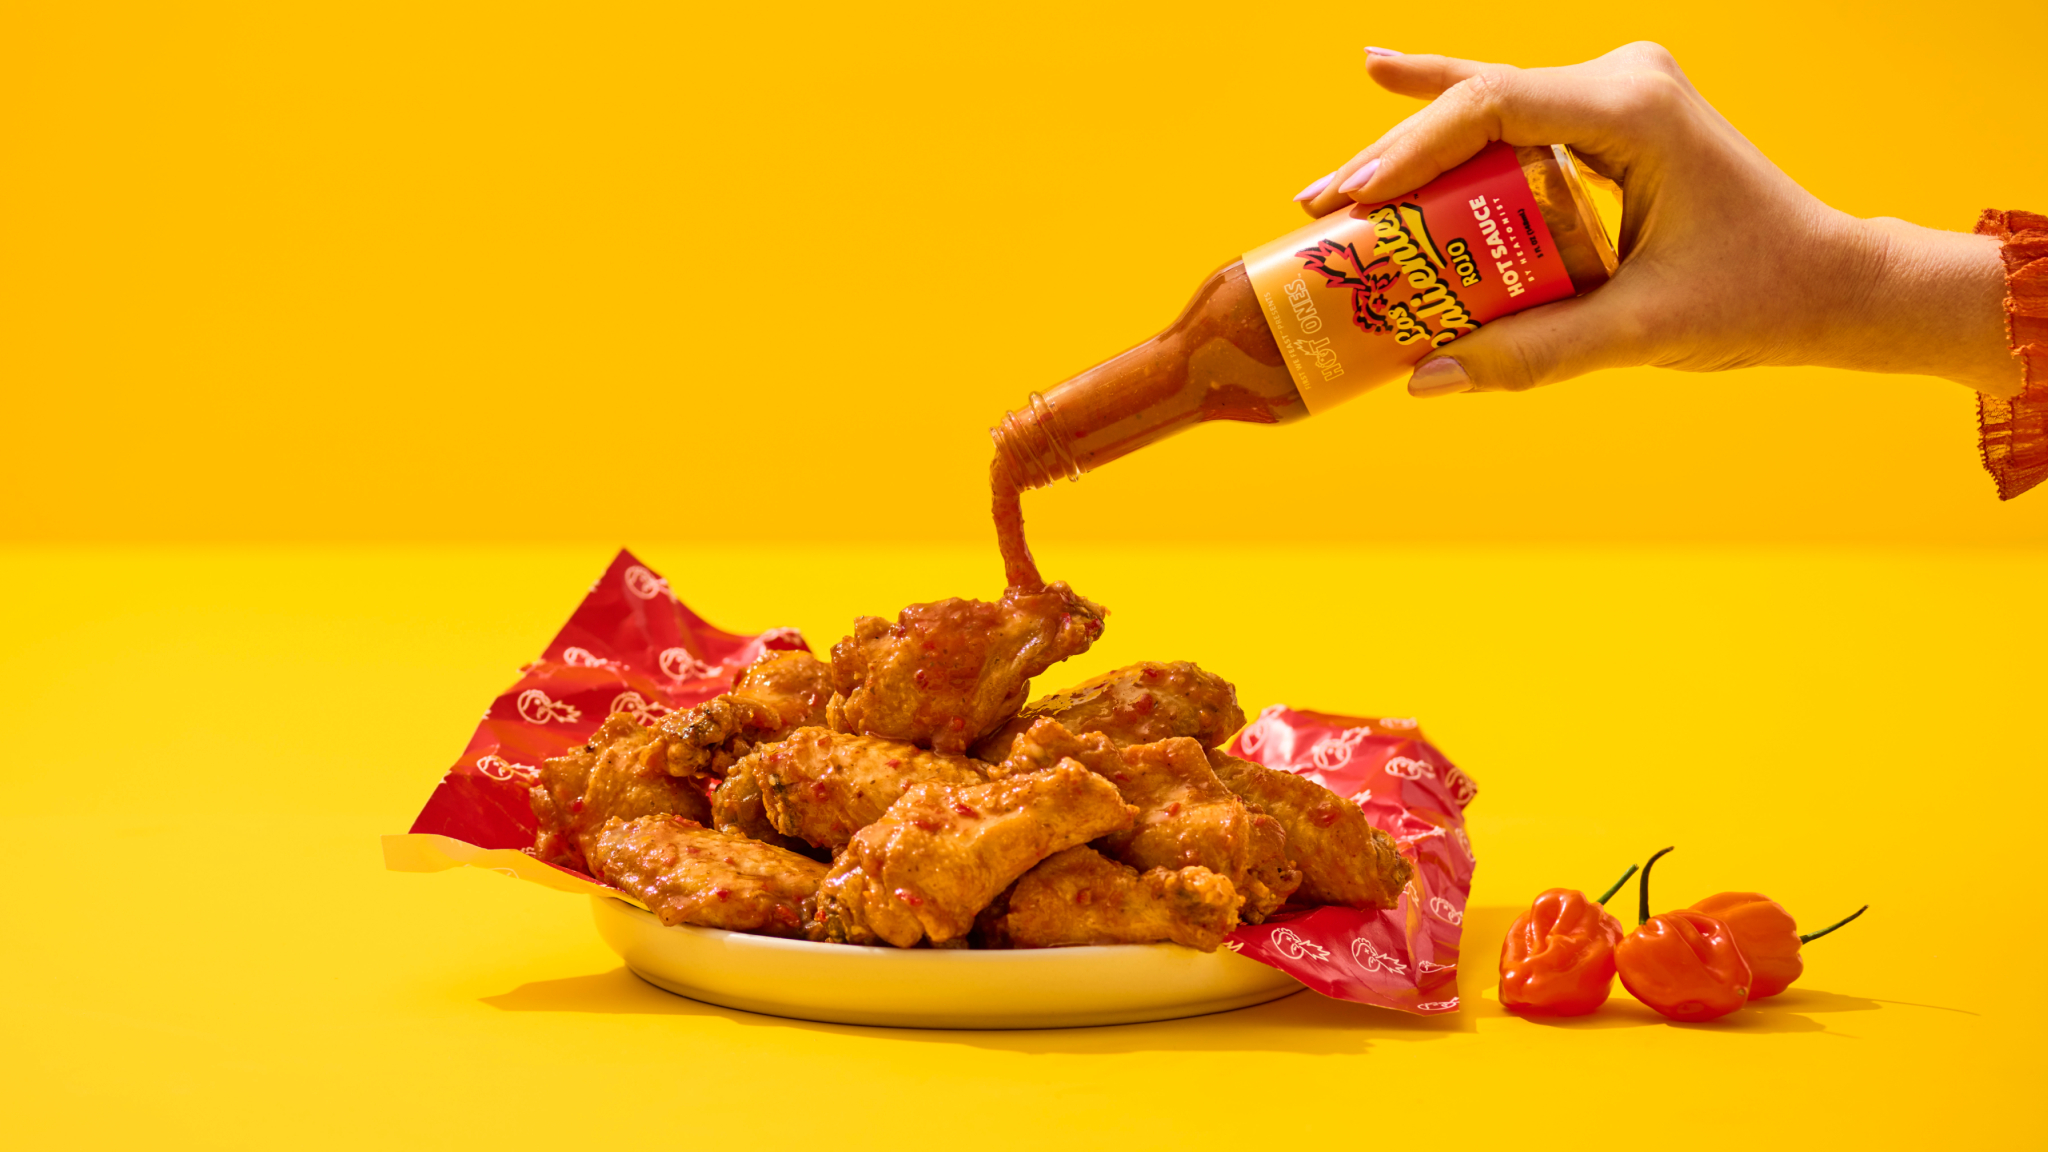 Hot Ones is bringing its iconic spicy wings to New York with a delivery  service